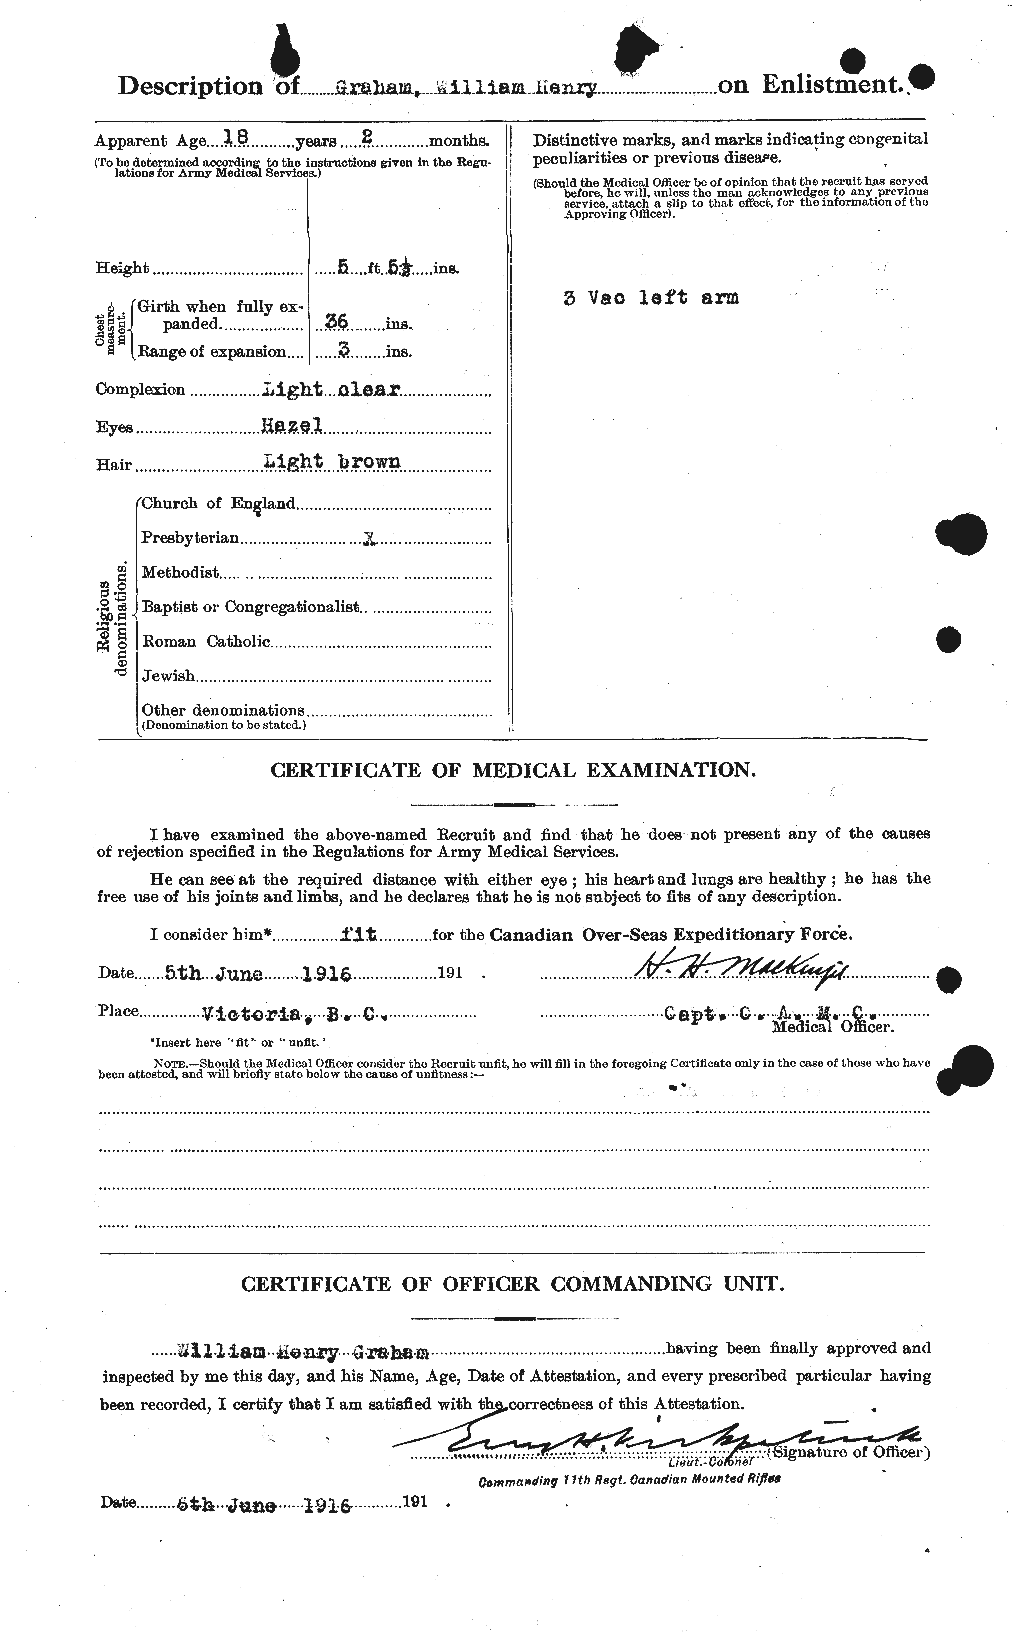 Personnel Records of the First World War - CEF 358000b